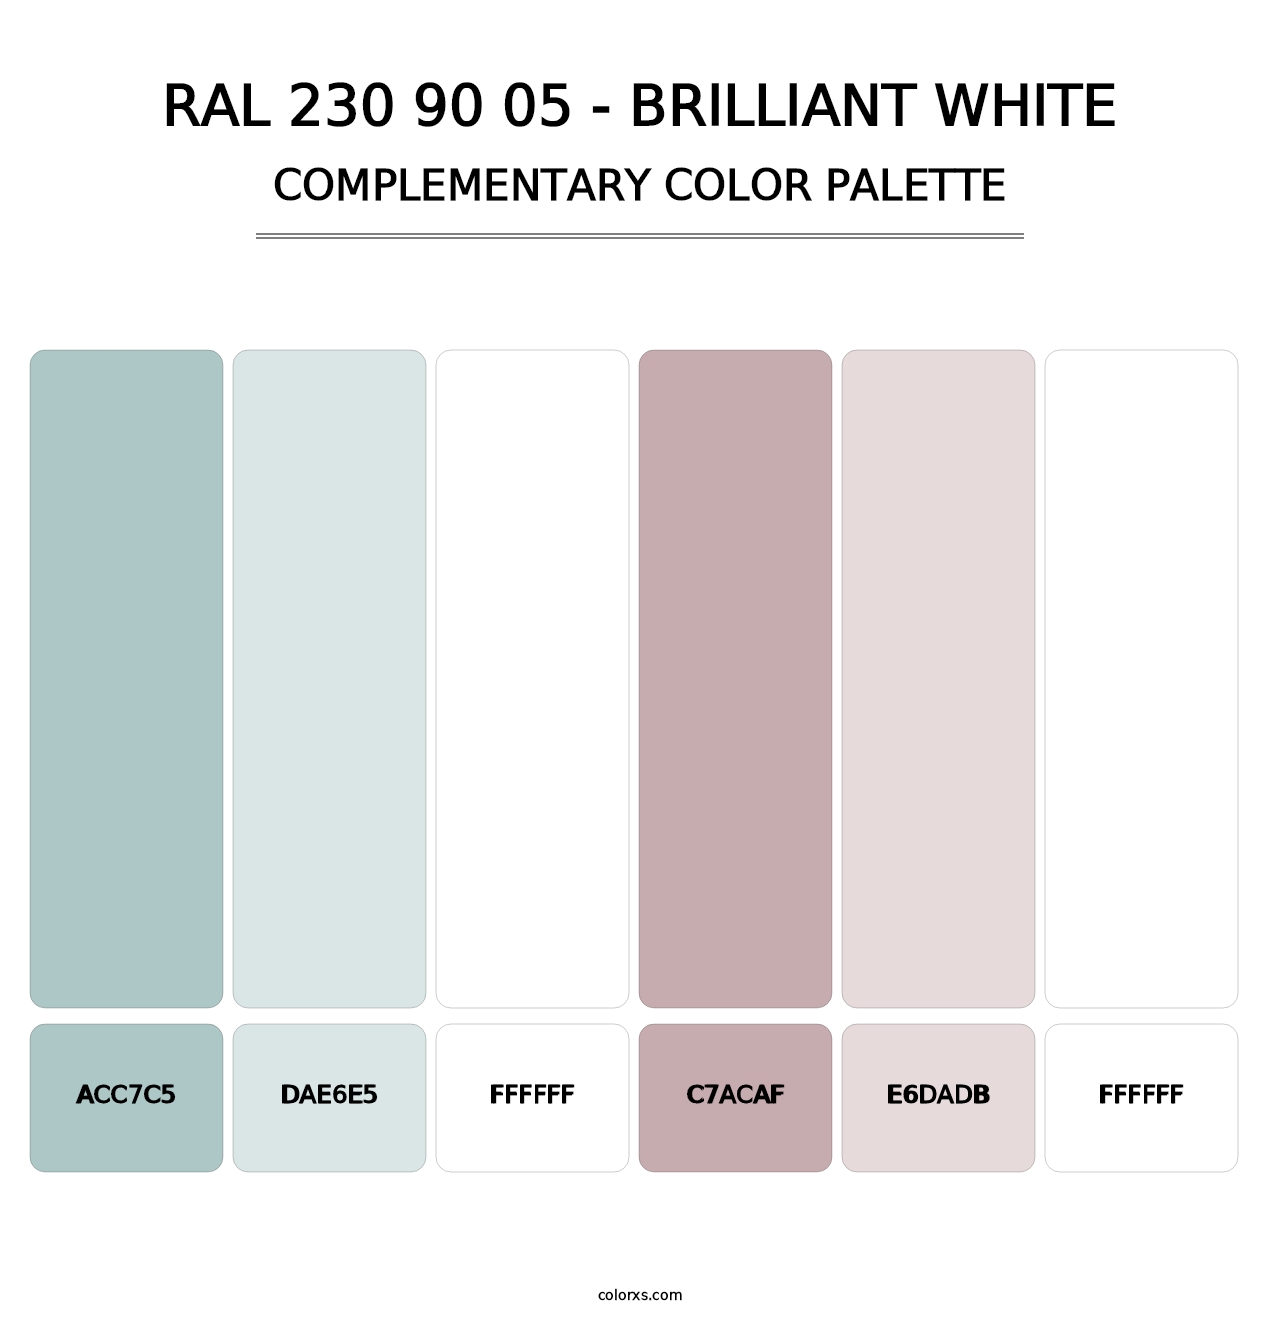 RAL 230 90 05 - Brilliant White - Complementary Color Palette